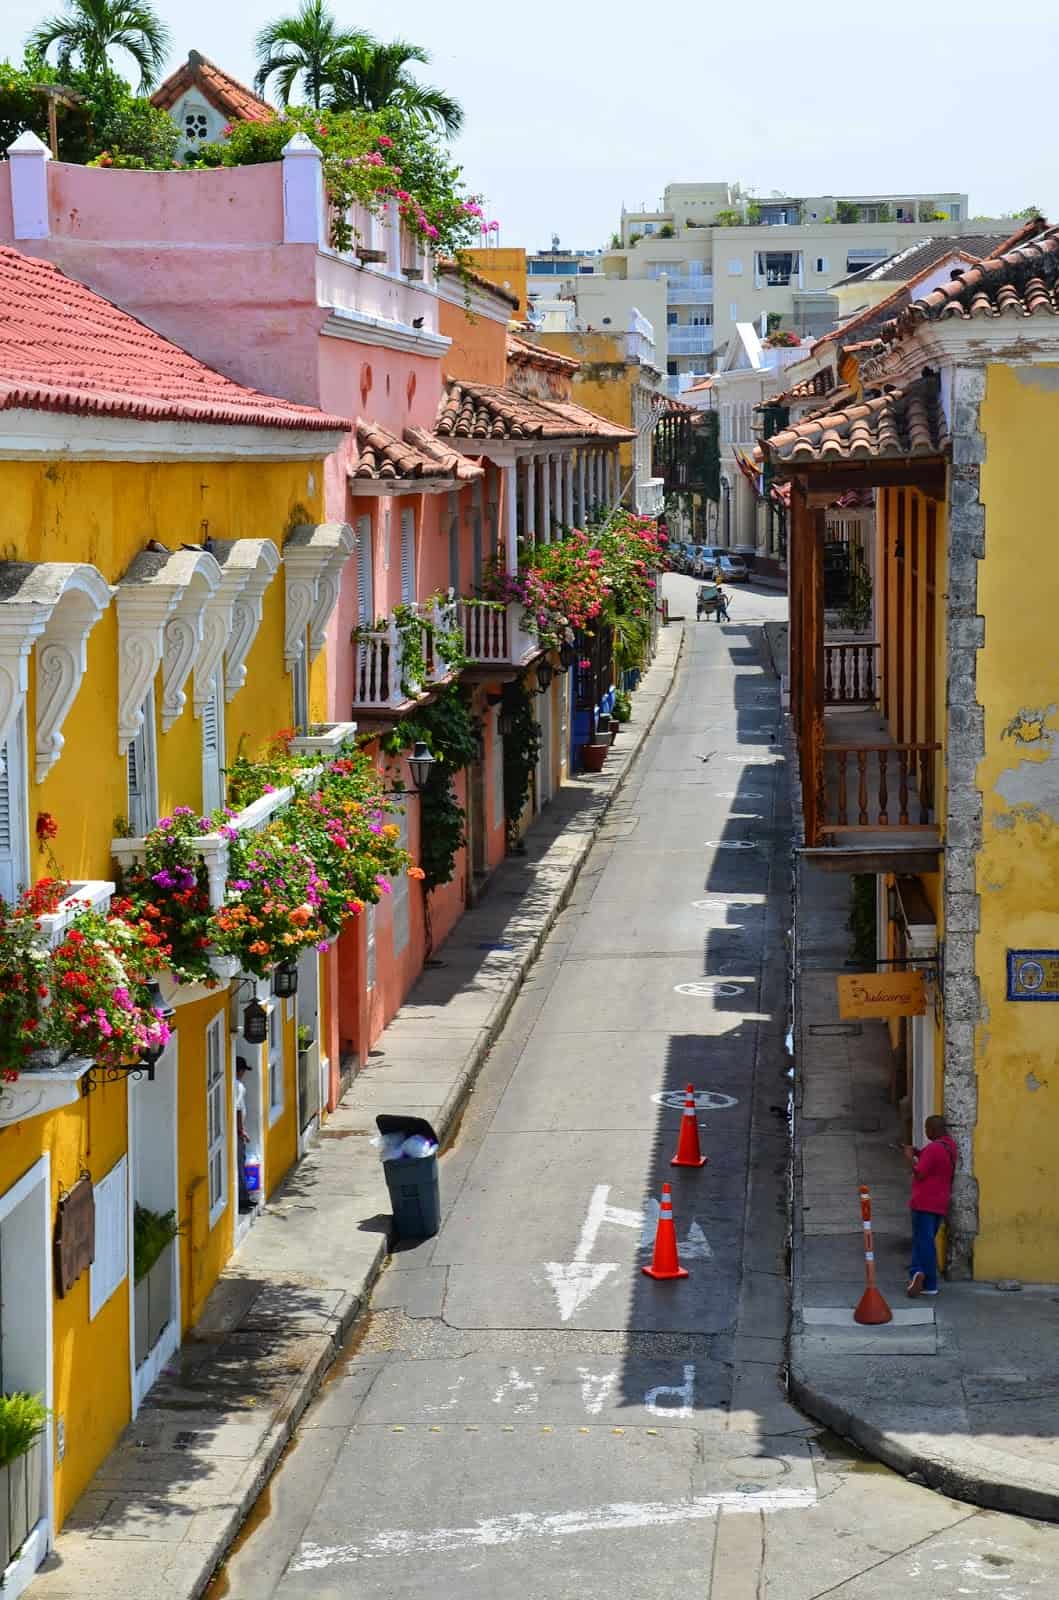 Looking down a street from the top of the walls of Cartagena, Bolívar, Colombia